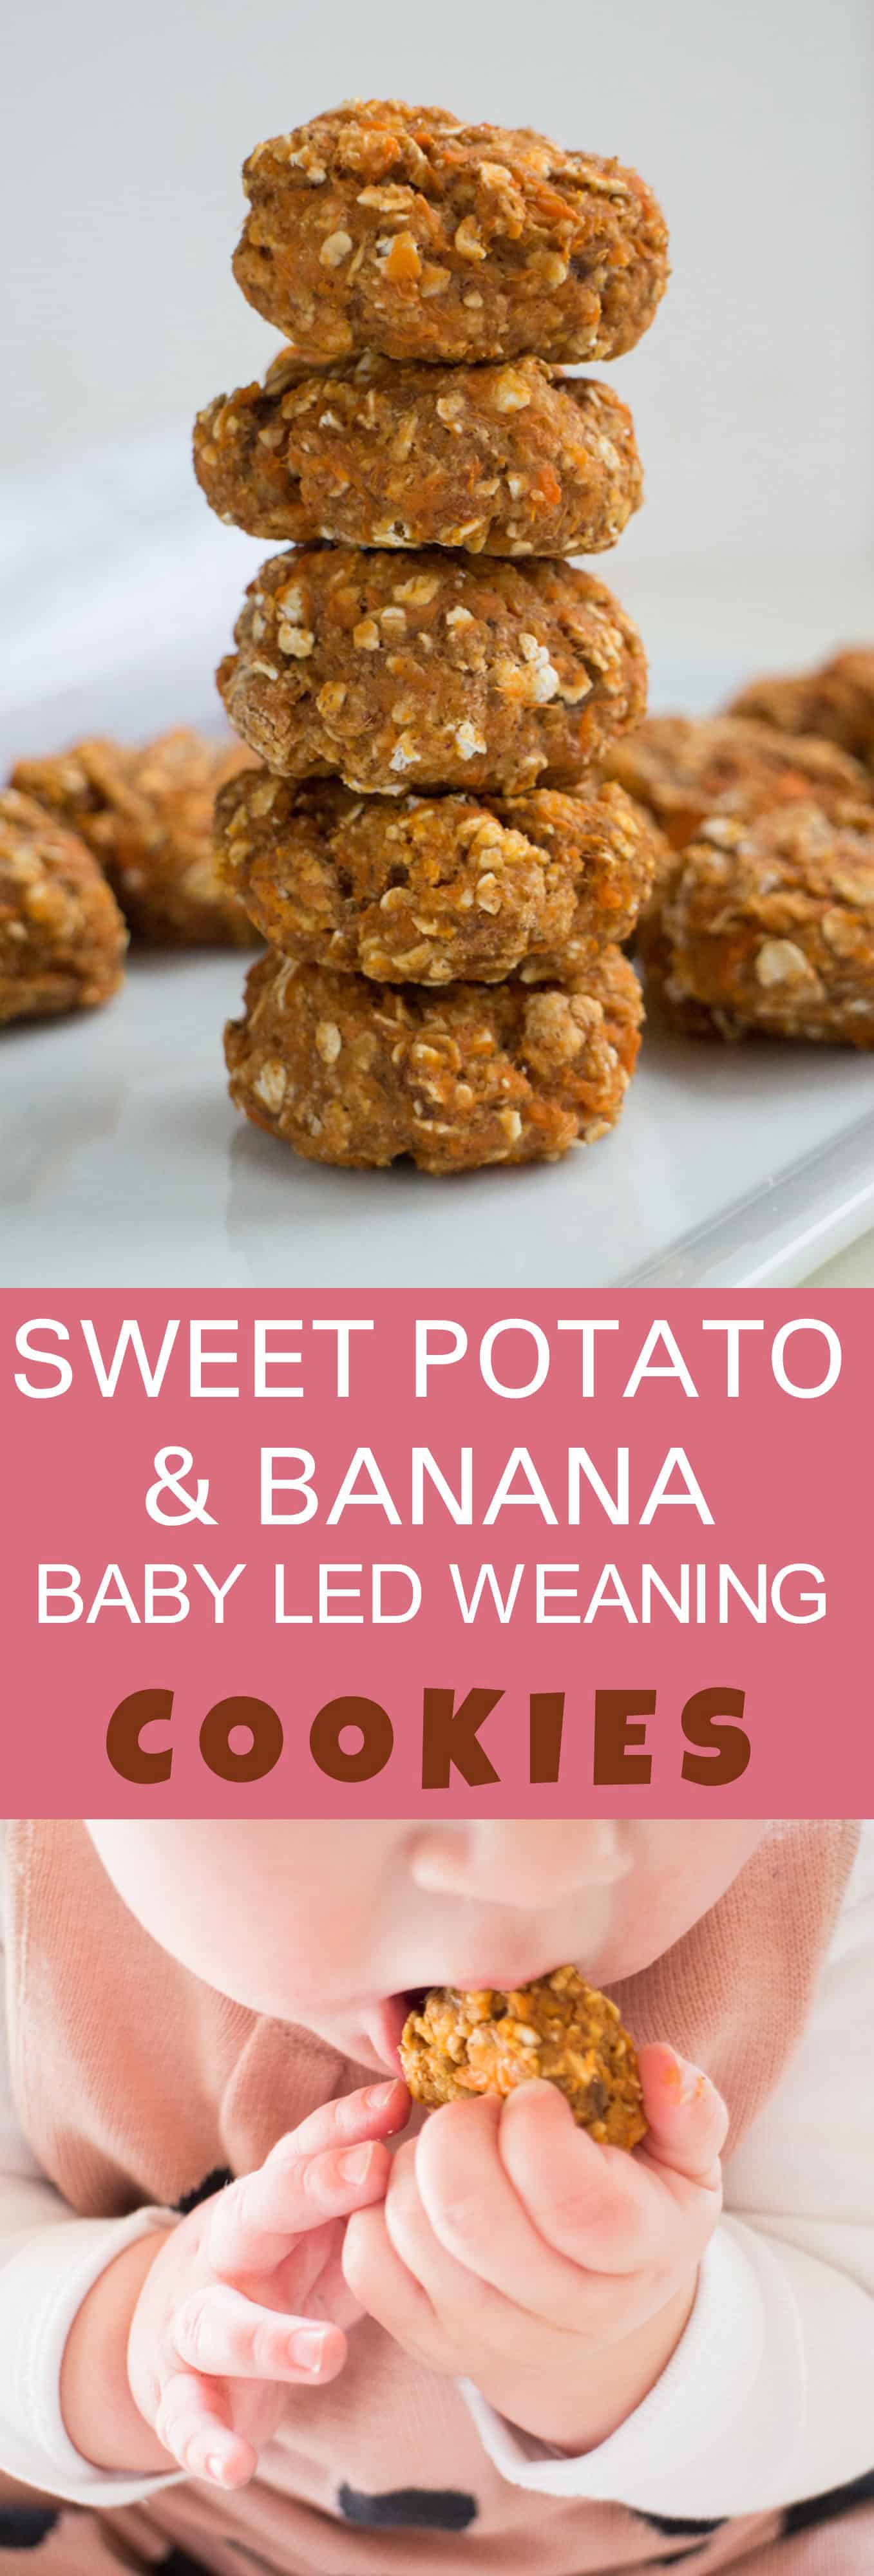 HOMEMADE COOKIES recipe for baby led weaning and soothing a teething baby! These healthy Sweet Potato cookies are made with mashed sweet potato, banana, baby cereal and oatmeal!   My favorite part is that these cookies are so delicious we can share them together! 